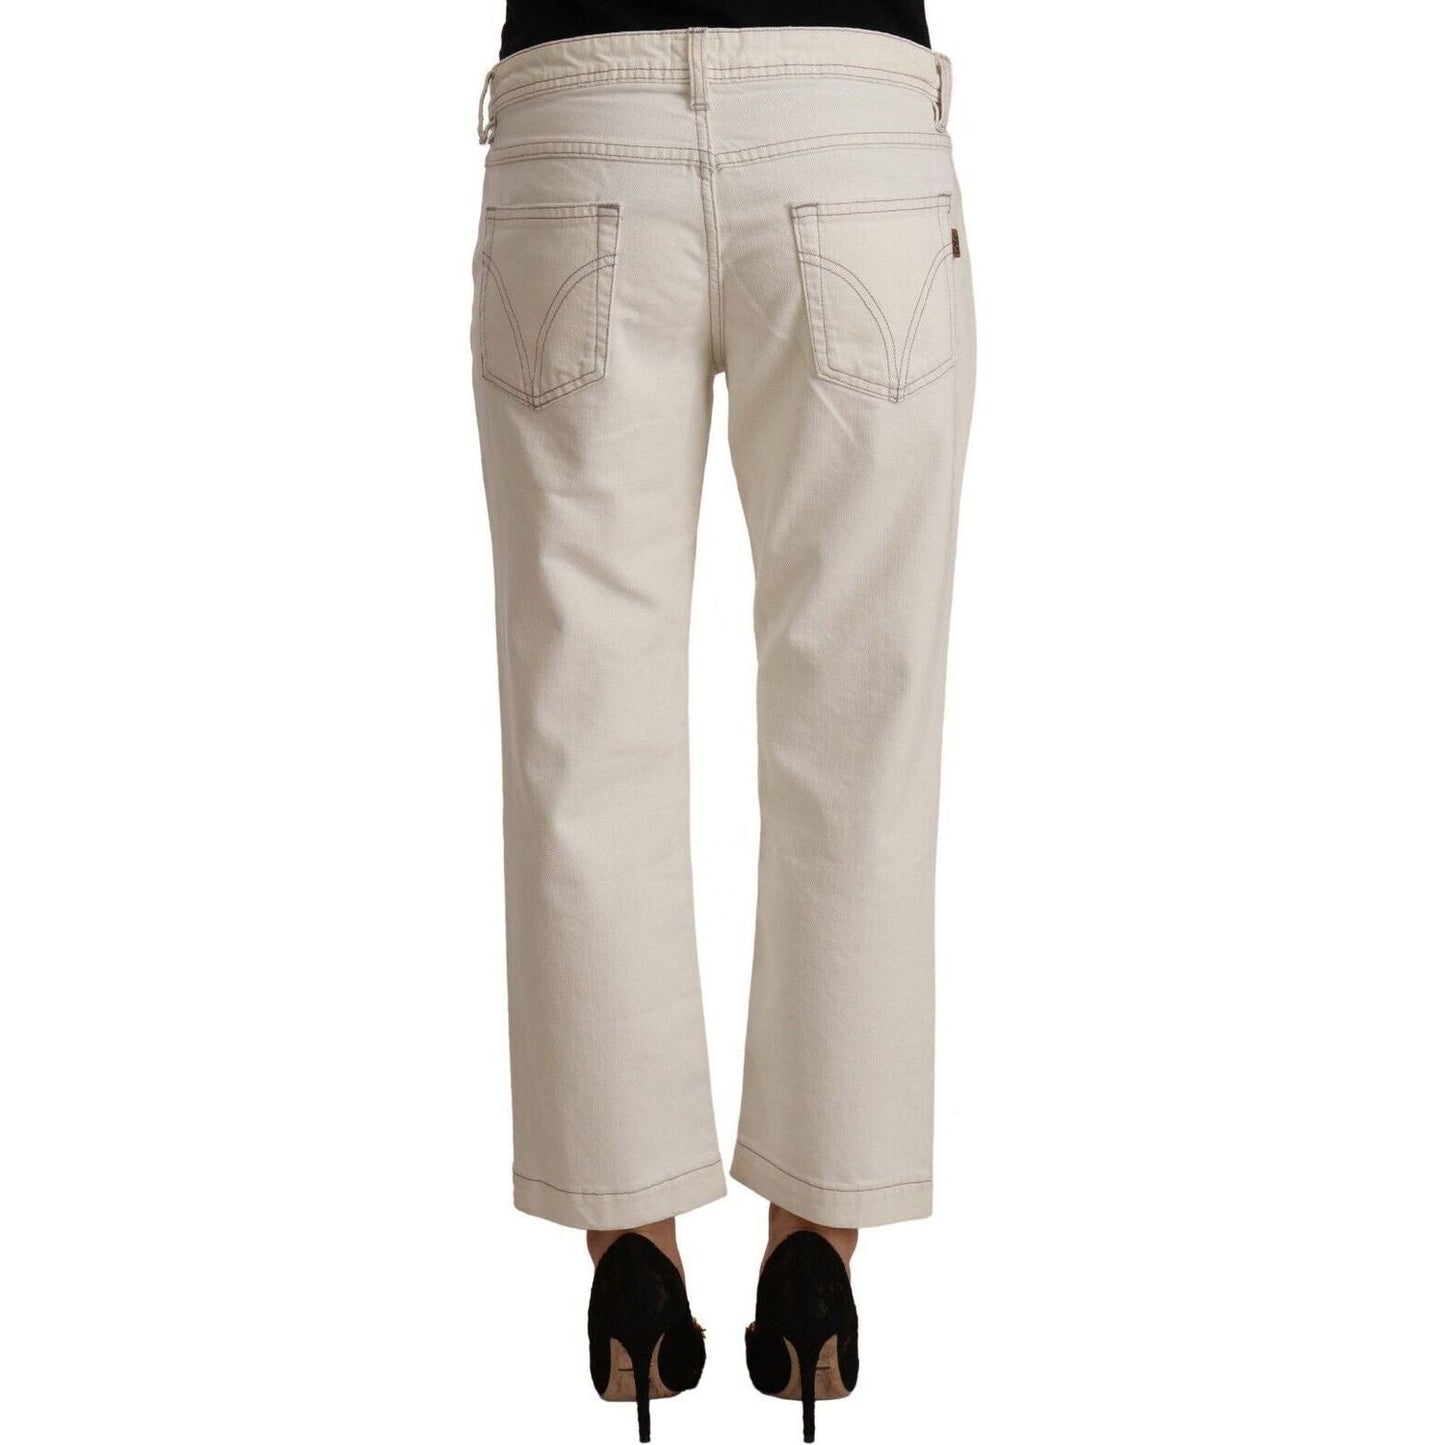 Dolce & Gabbana Chic Off-White Cropped Jeans - Fashionista Must-Have off-white-cotton-flared-cropped-denim-jeans